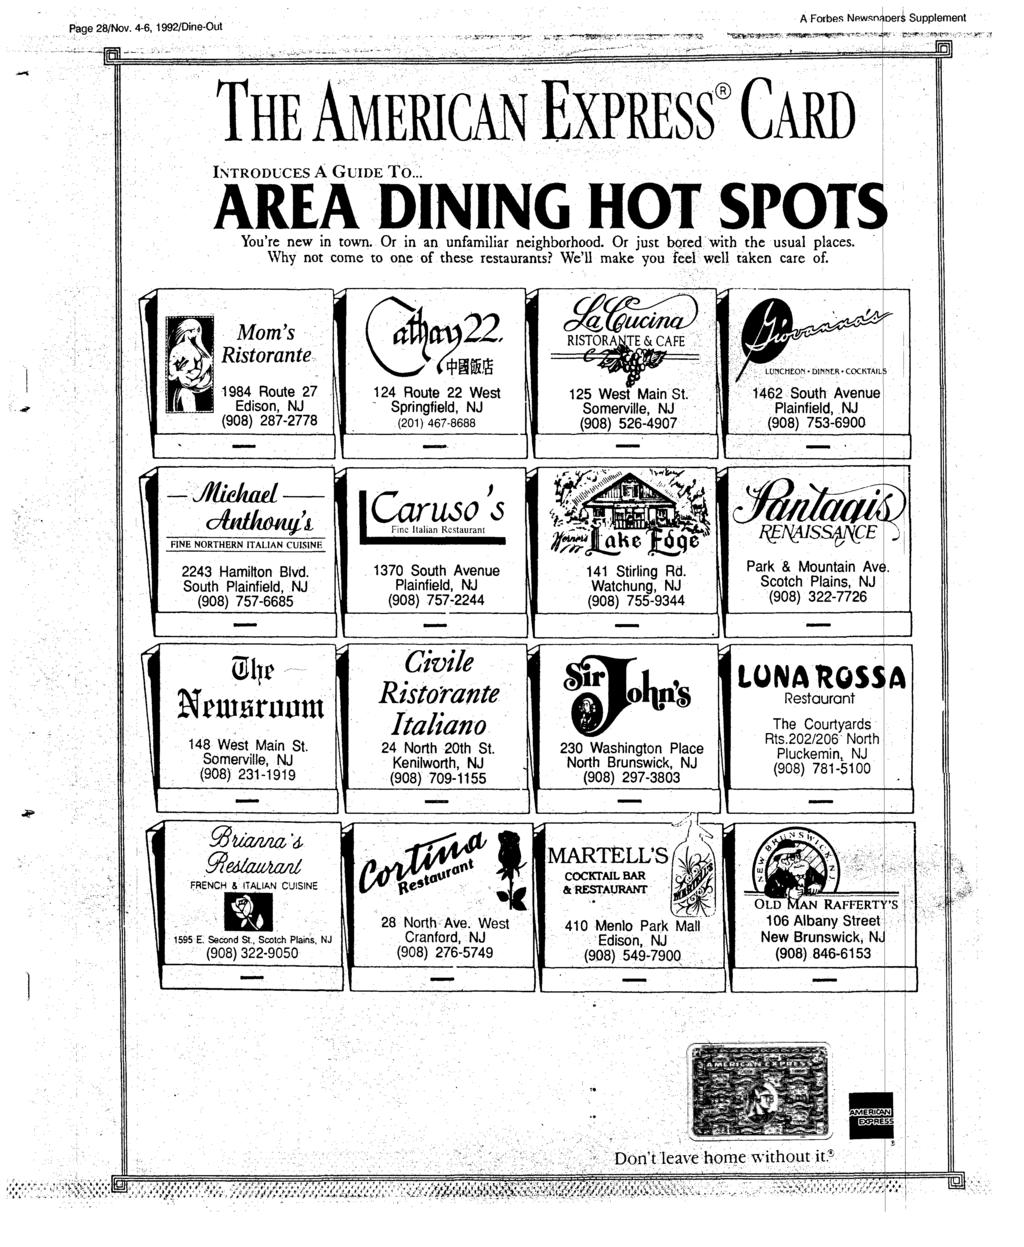 Page 28/Nov. 4-6,1992/Dine-Out A Forbes Nf>wsn;iDeri Supplement THE AMERICAN EXPRESS 9 CARD INTRODUCES A GUIDE To... AREA DINING HOT SPOTS You're new in town. Or in an unfamiliar neighborhood.